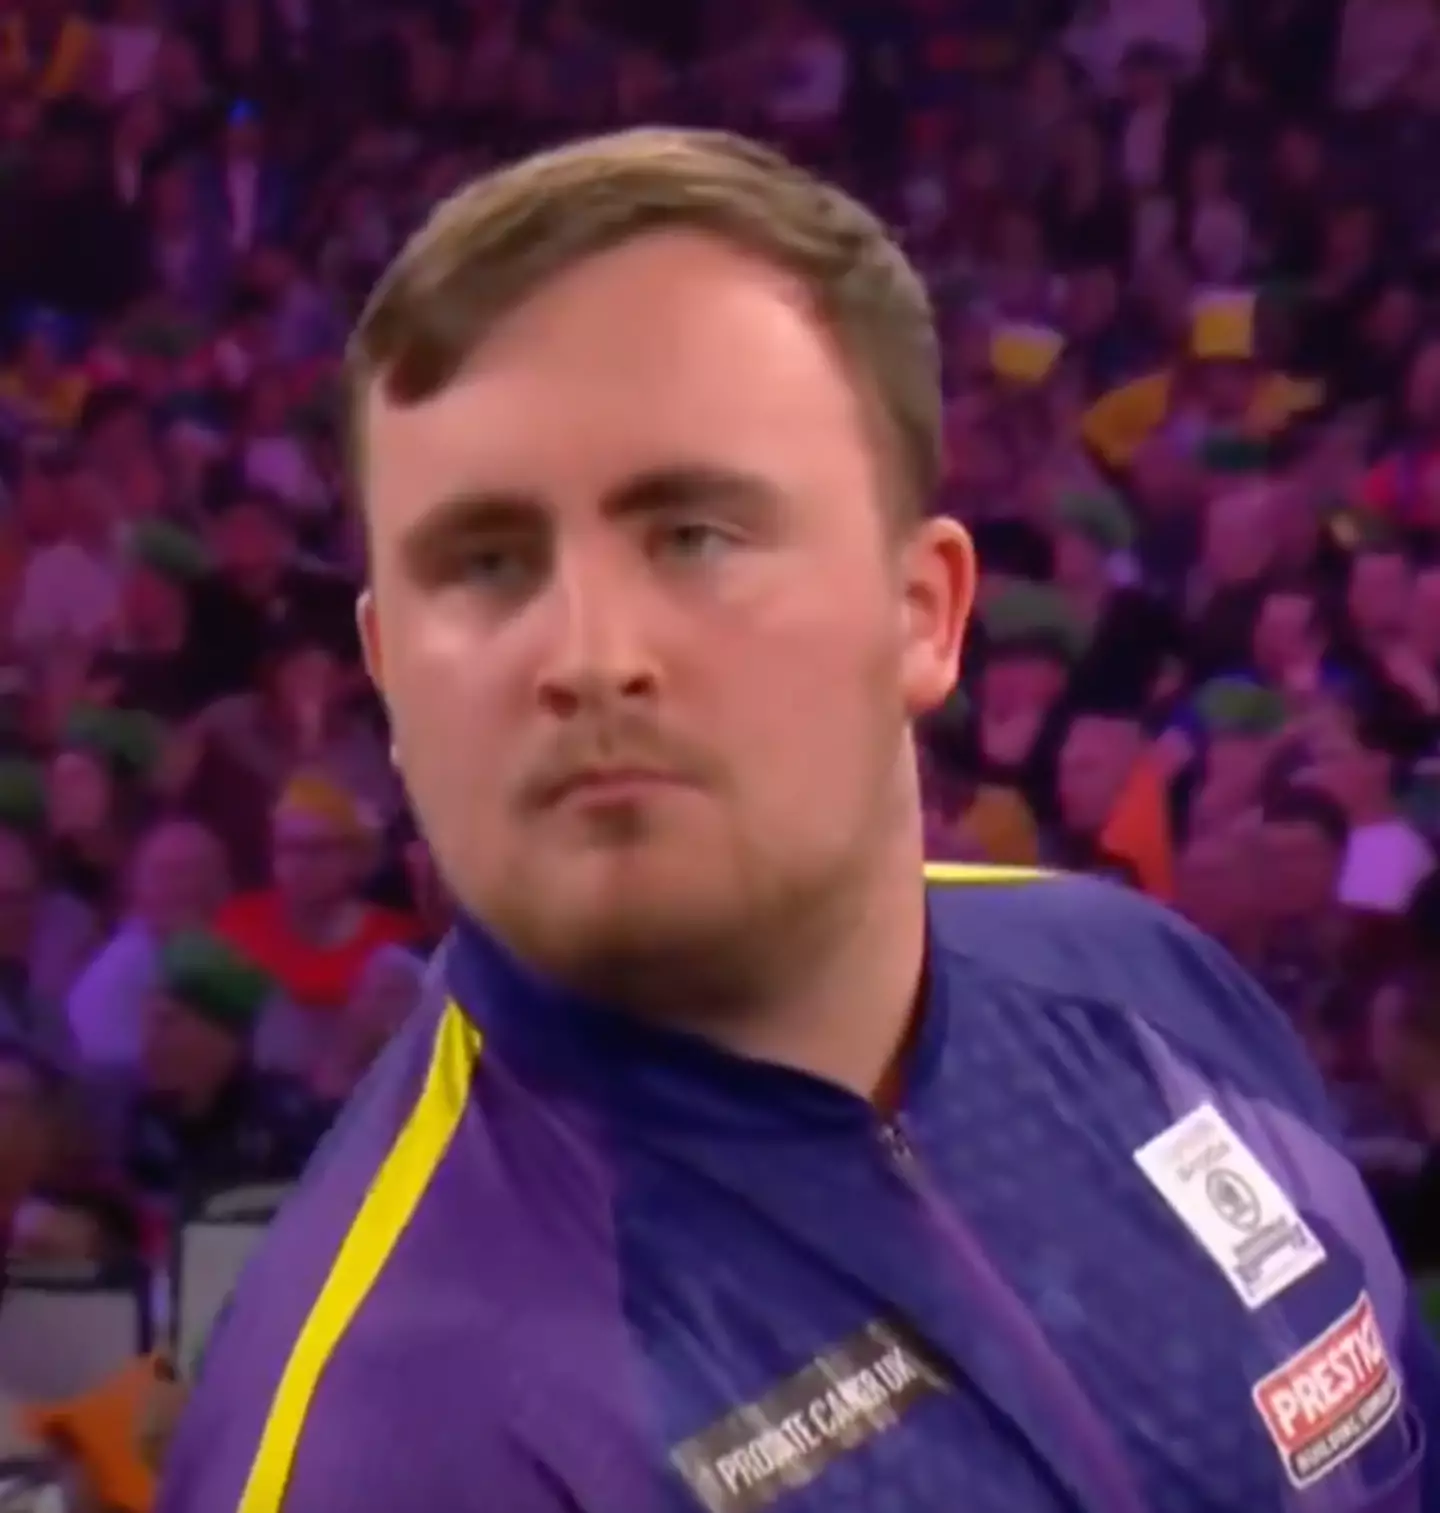 The 16-year-old divided fans after asking the crowd if he should go for a 170 checkout.